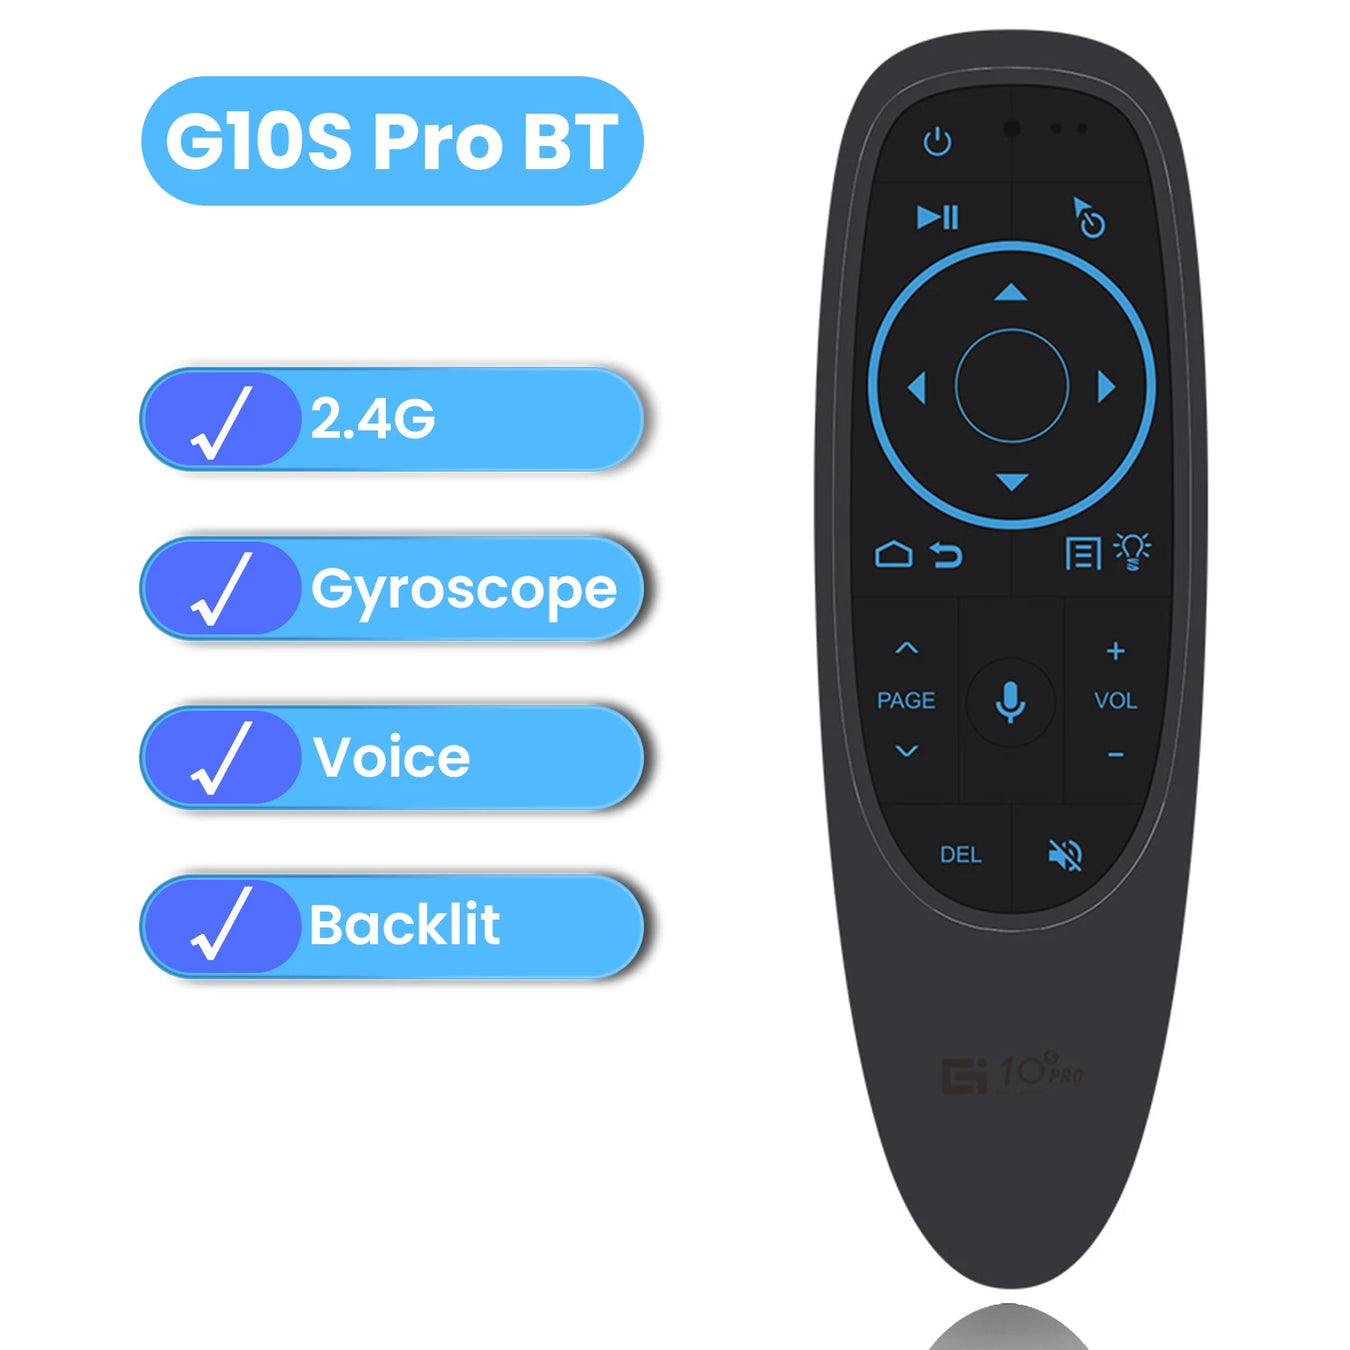 Voice assistant Air Mouse Remote 2.4Ghz Mini Wireless Android TV Control & Learning Microphone for Computer PC Android TV G10S PRO BT CHINA